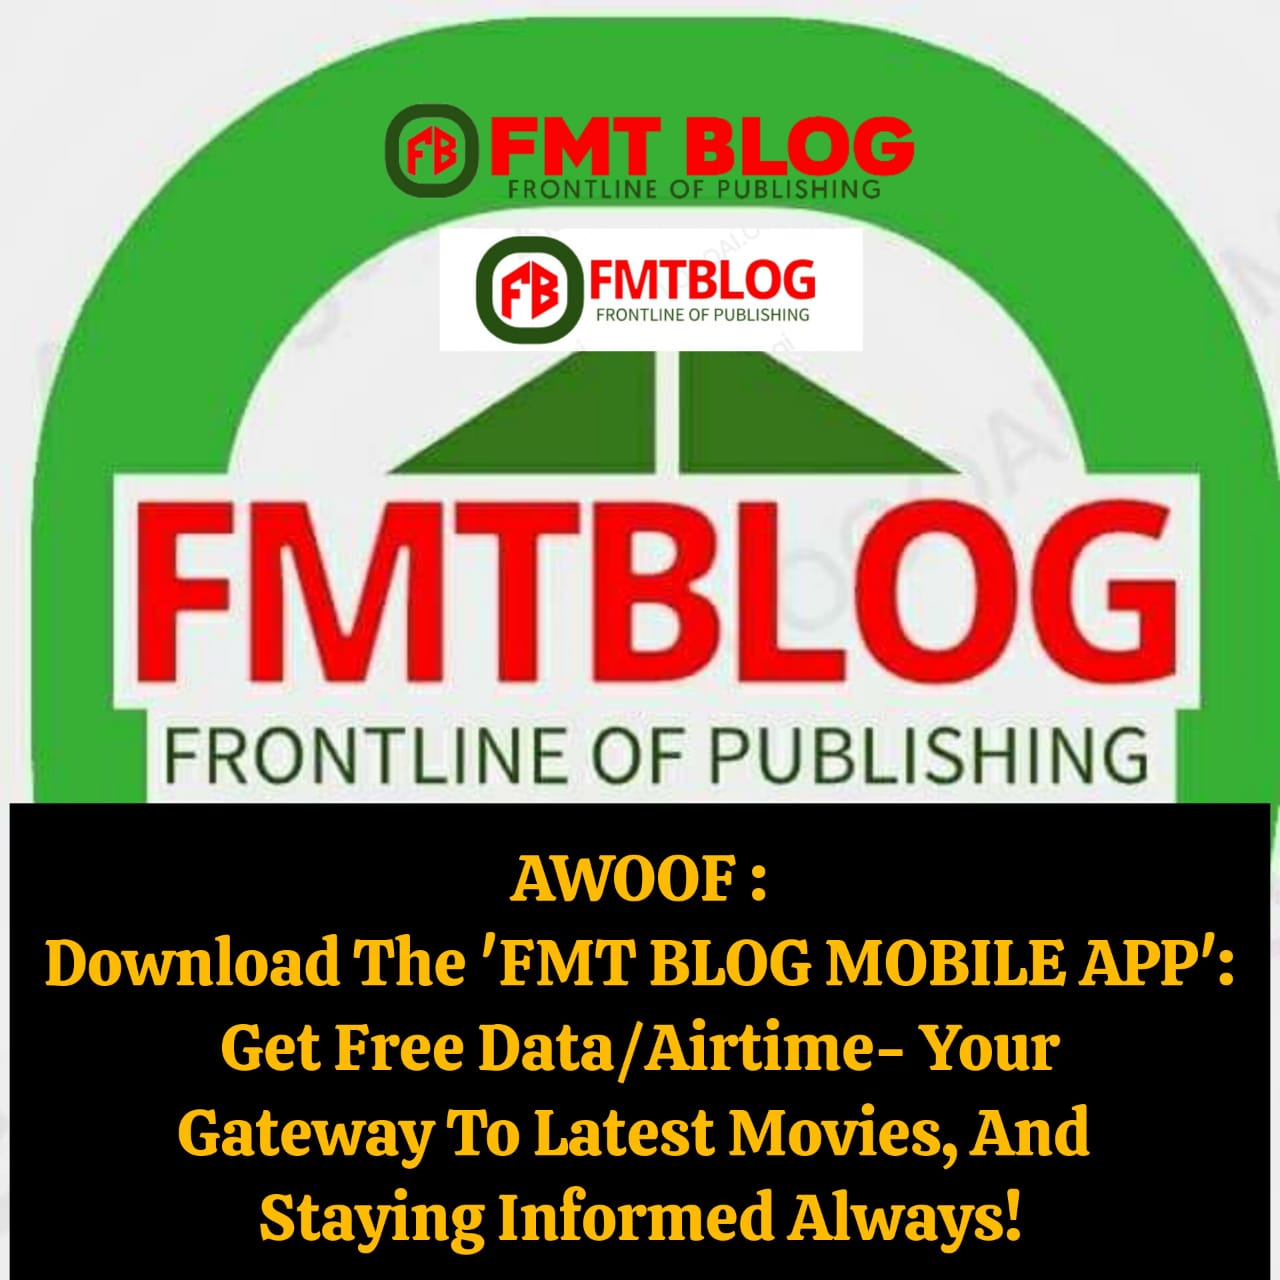 Download The FMT BLOG Mobile App Now: Get Free DATA/Airtime-Your Gateway to Latest Movies, And Staying Informed Always!